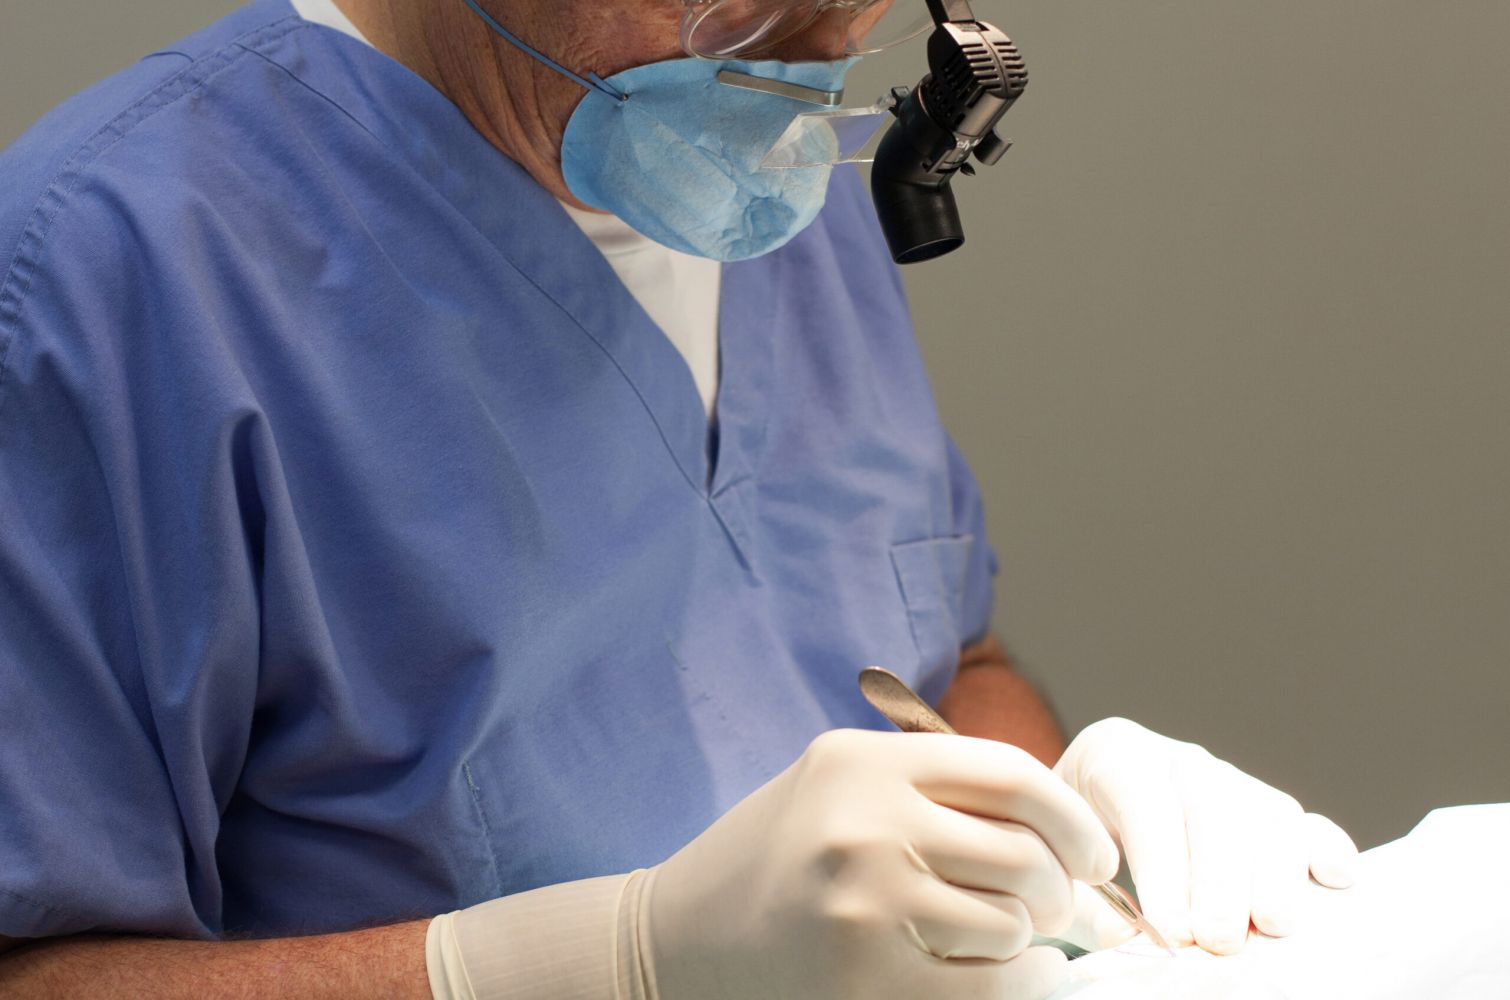 A man wearing a surgical mask, using a scalpel.